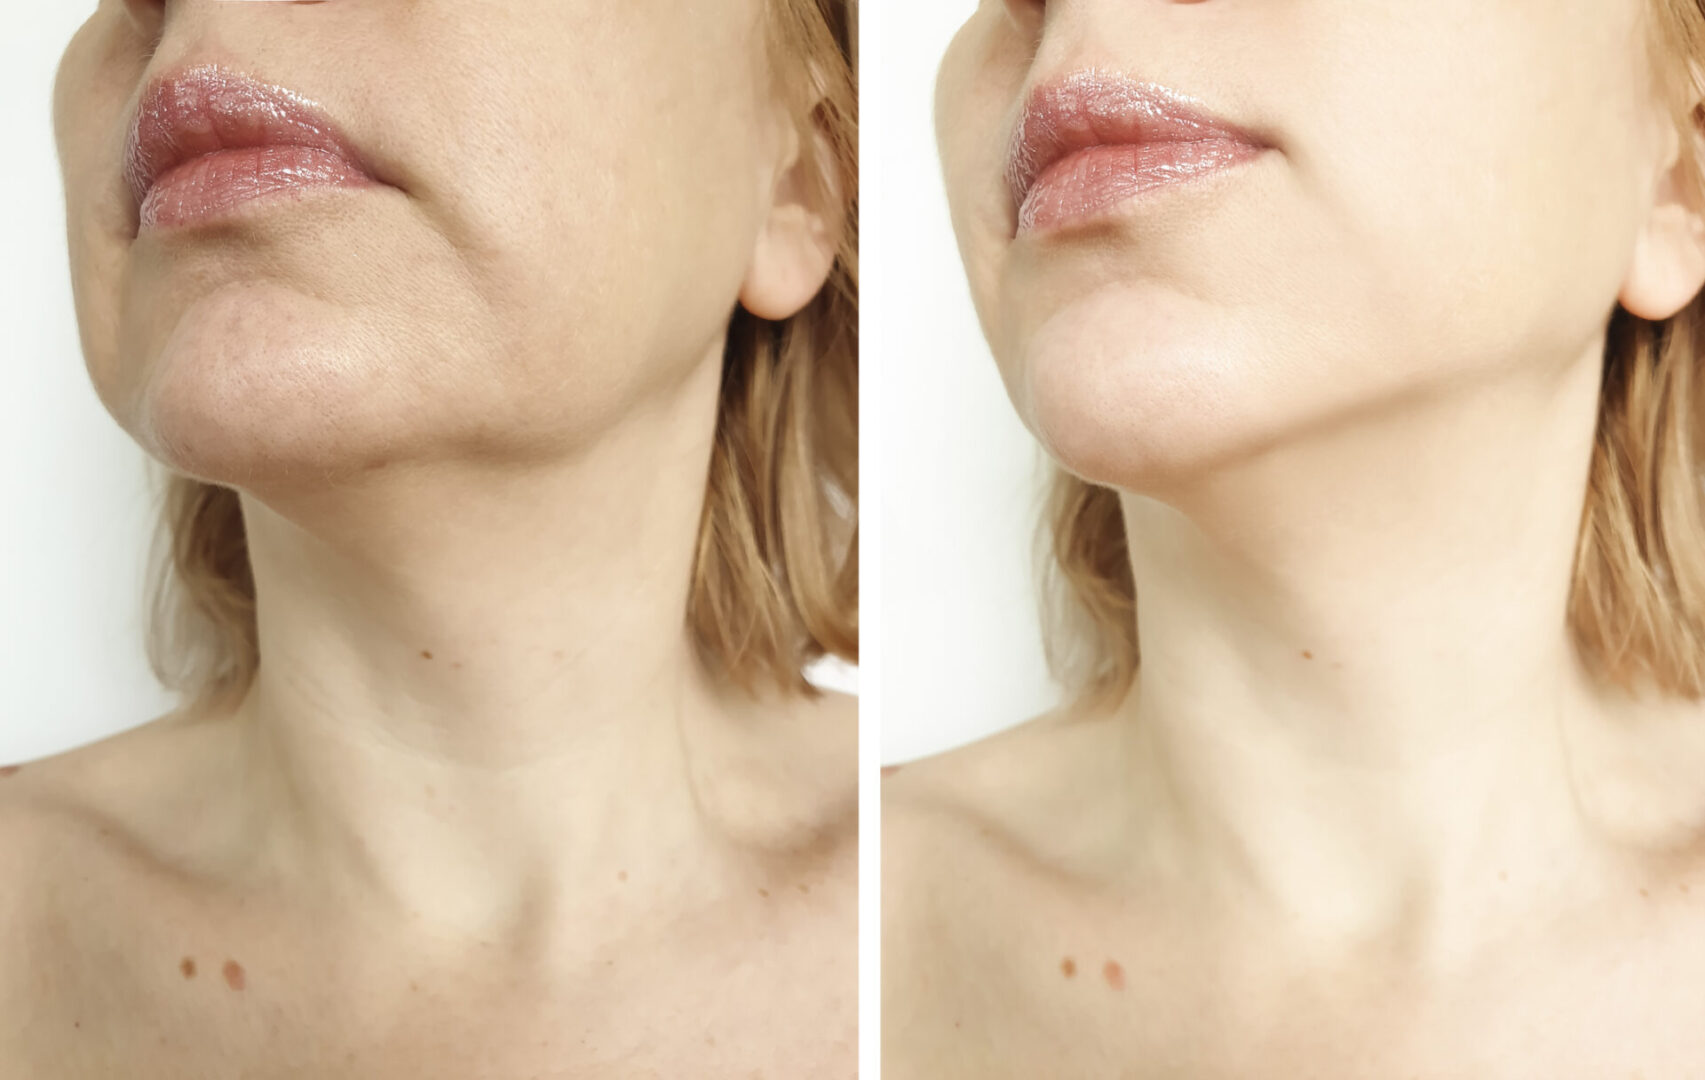 woman PDO tightening the chin before and after the procedure